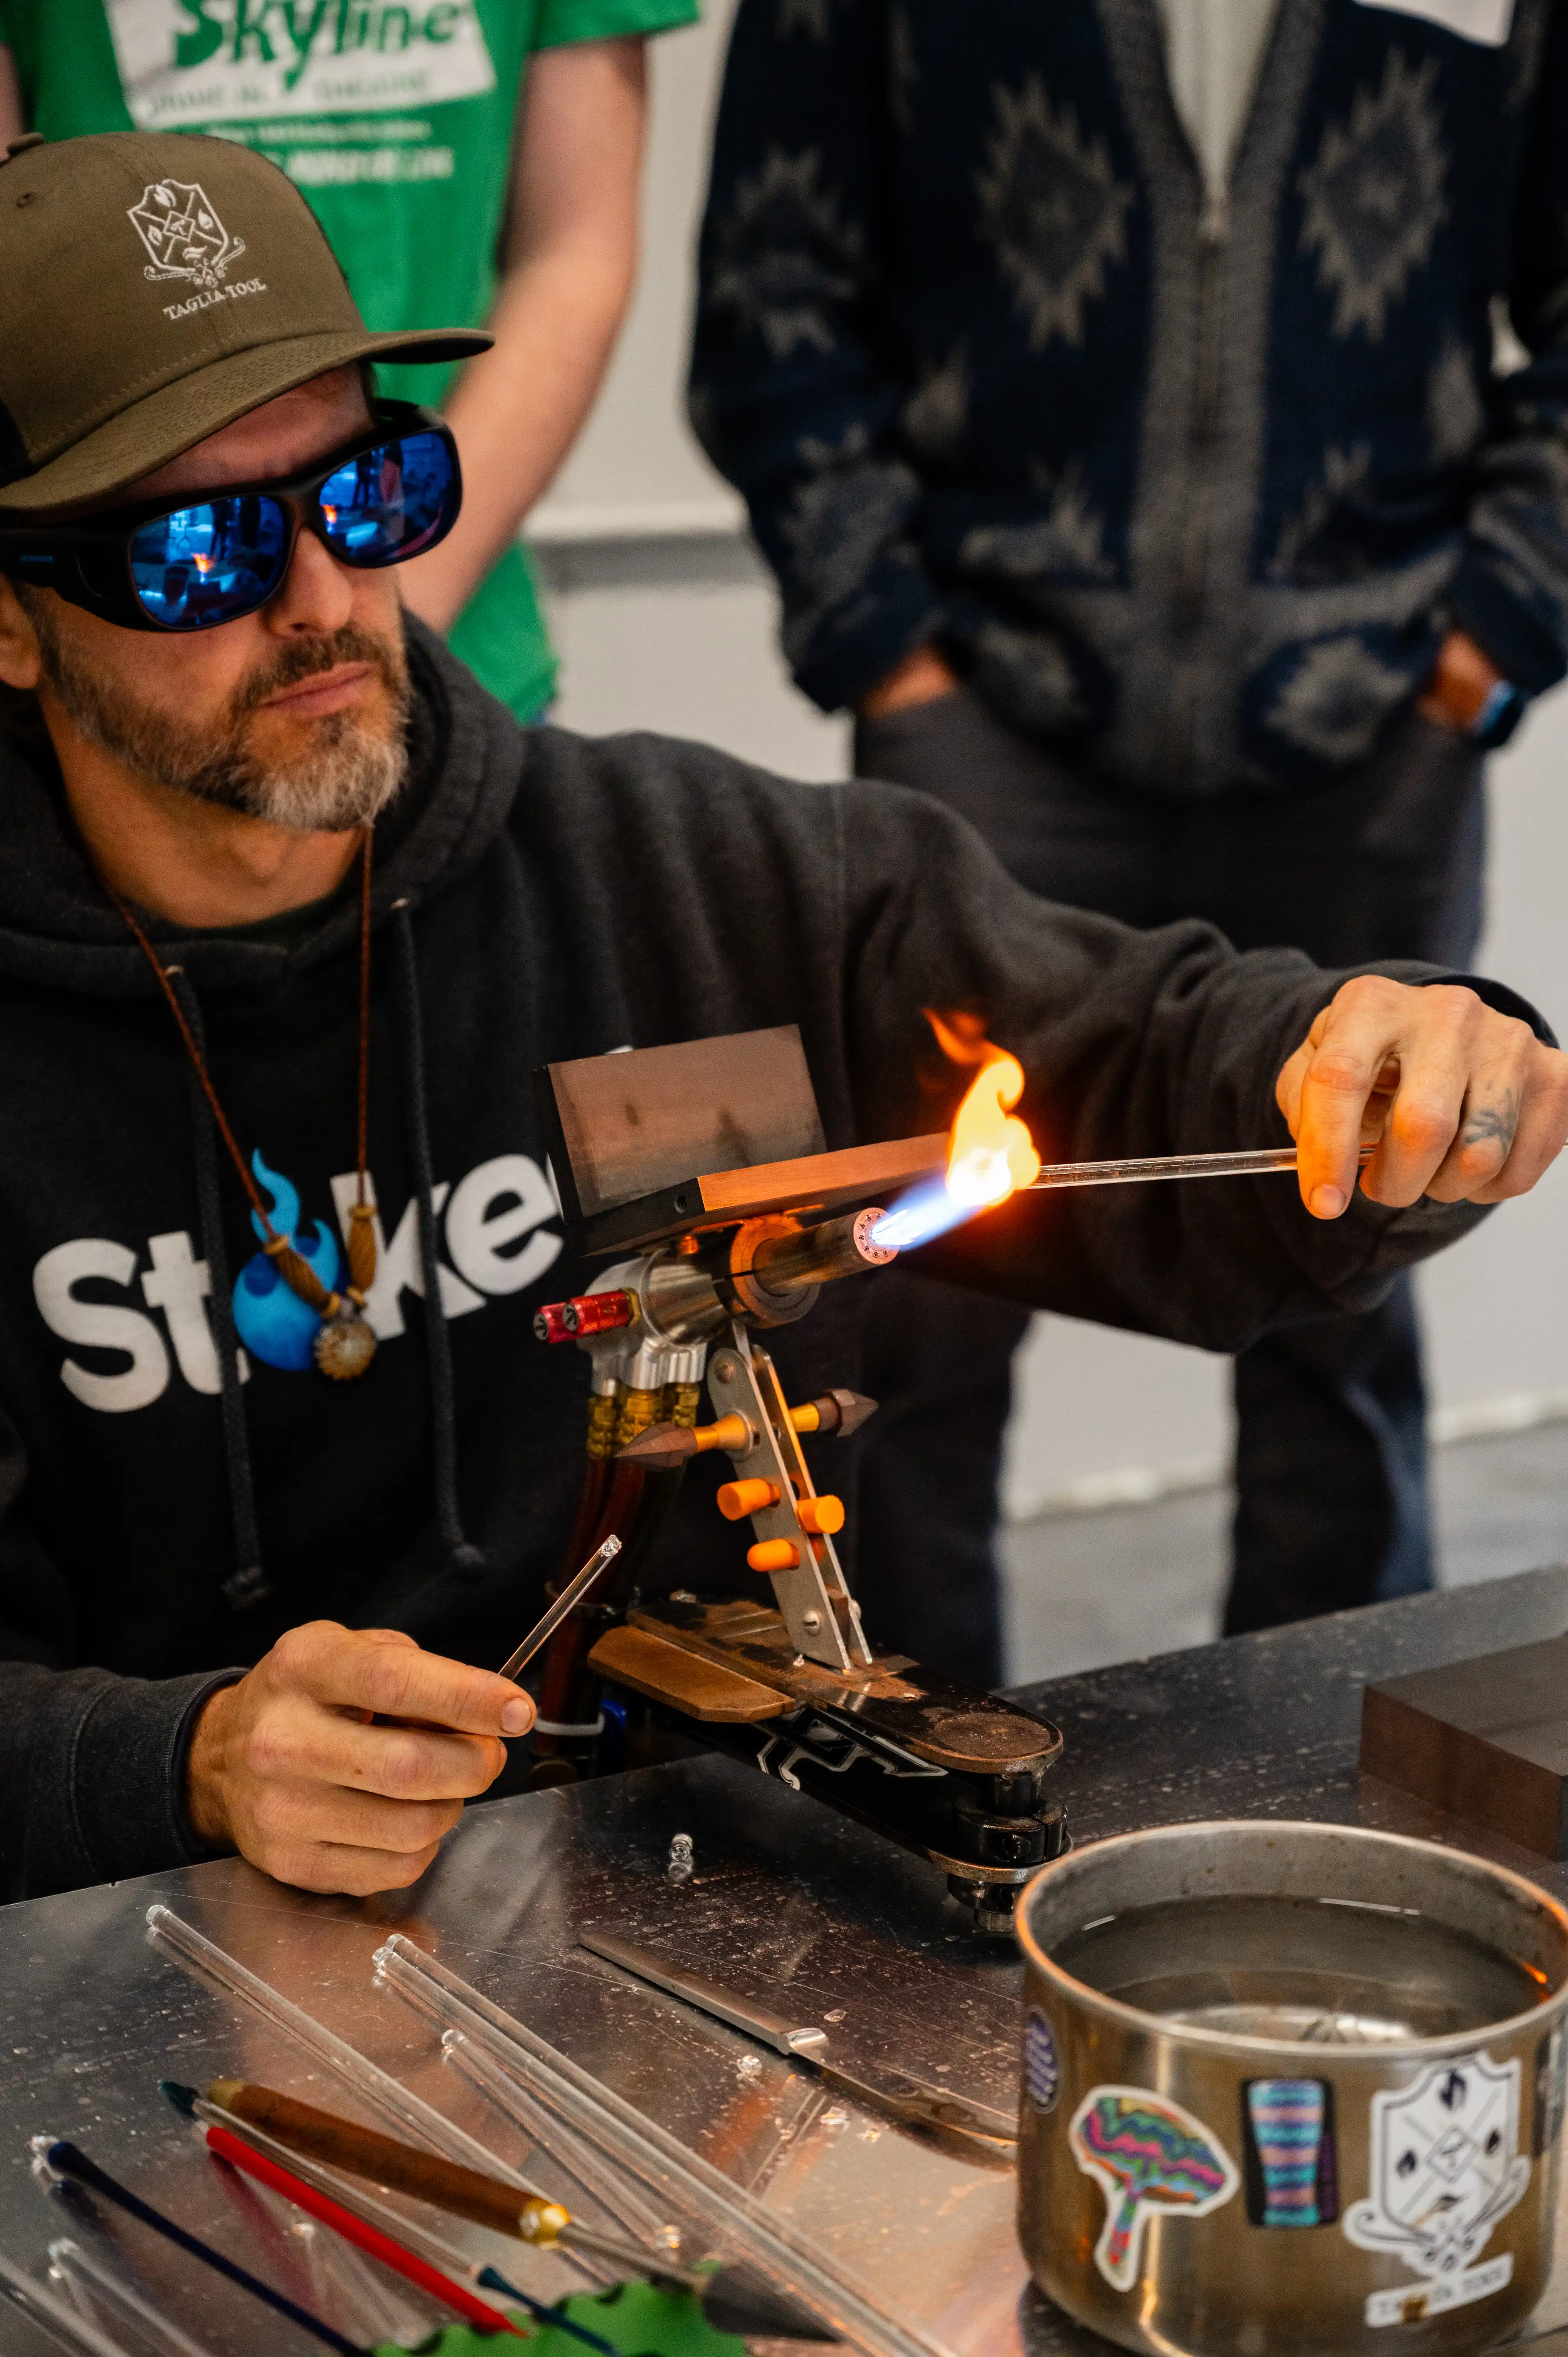 Glassblower using a torch to shape a piece of glass, wearing sunglasses and a hooded sweatshirt, with tools on the table in front.